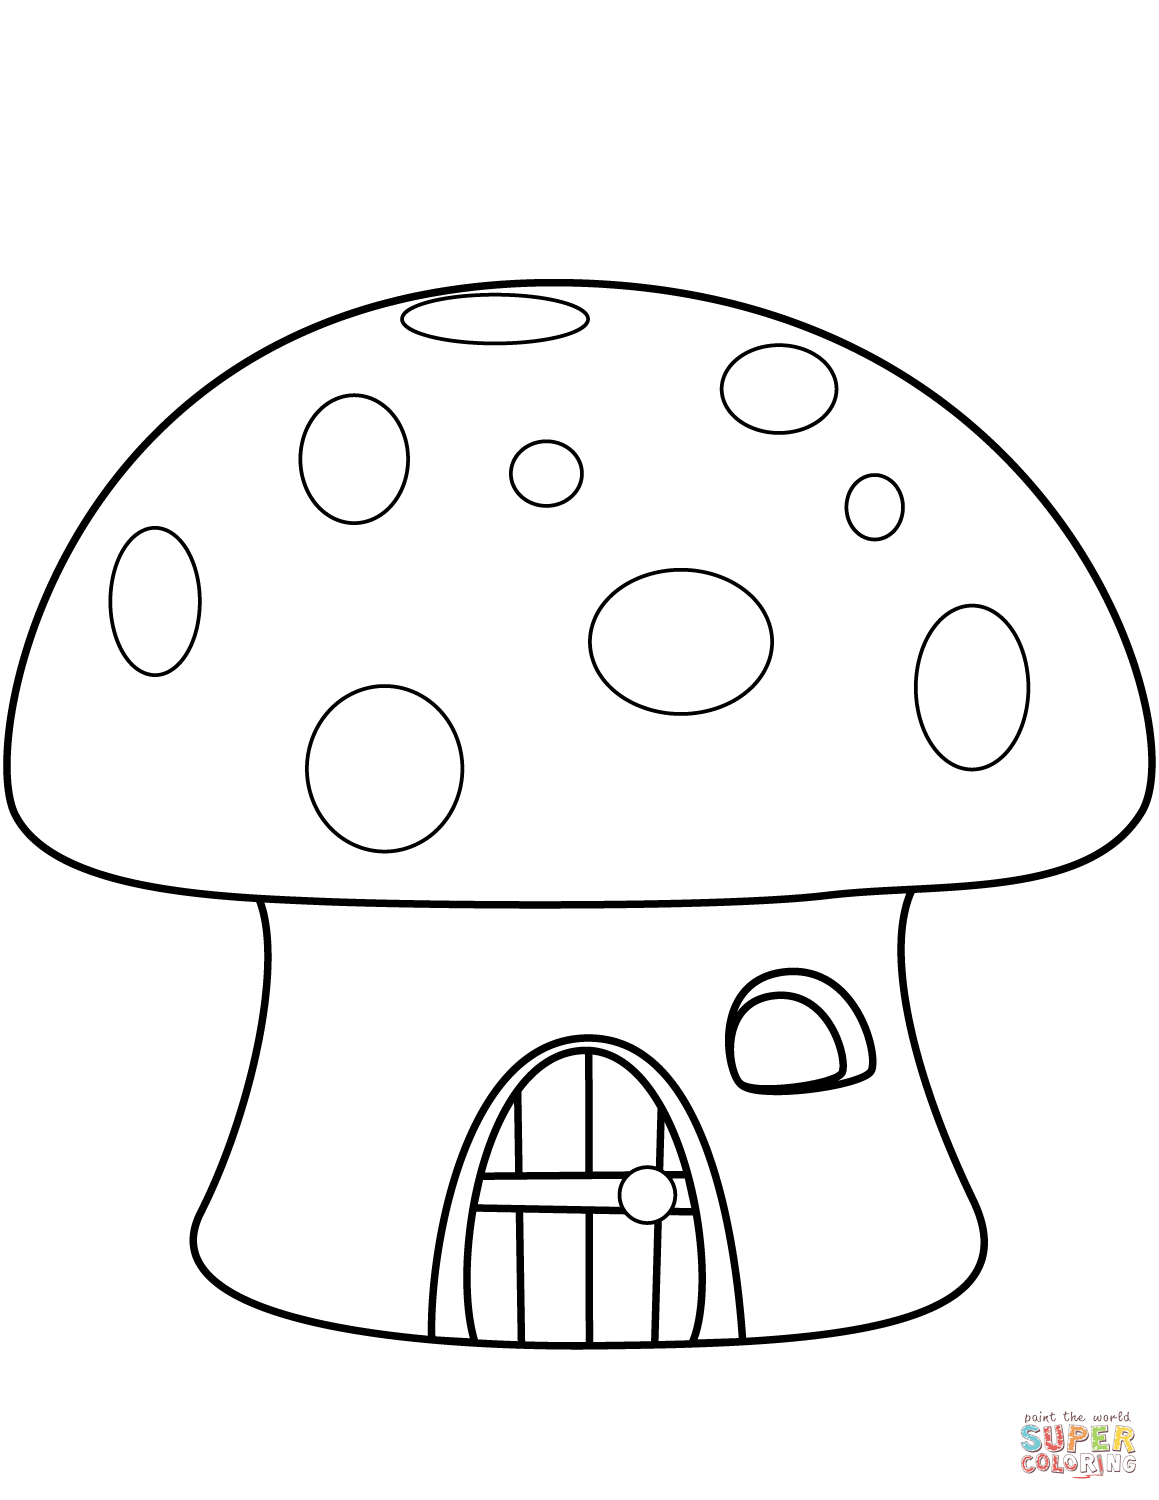 Mushroom House coloring page | Free Printable Coloring Pages